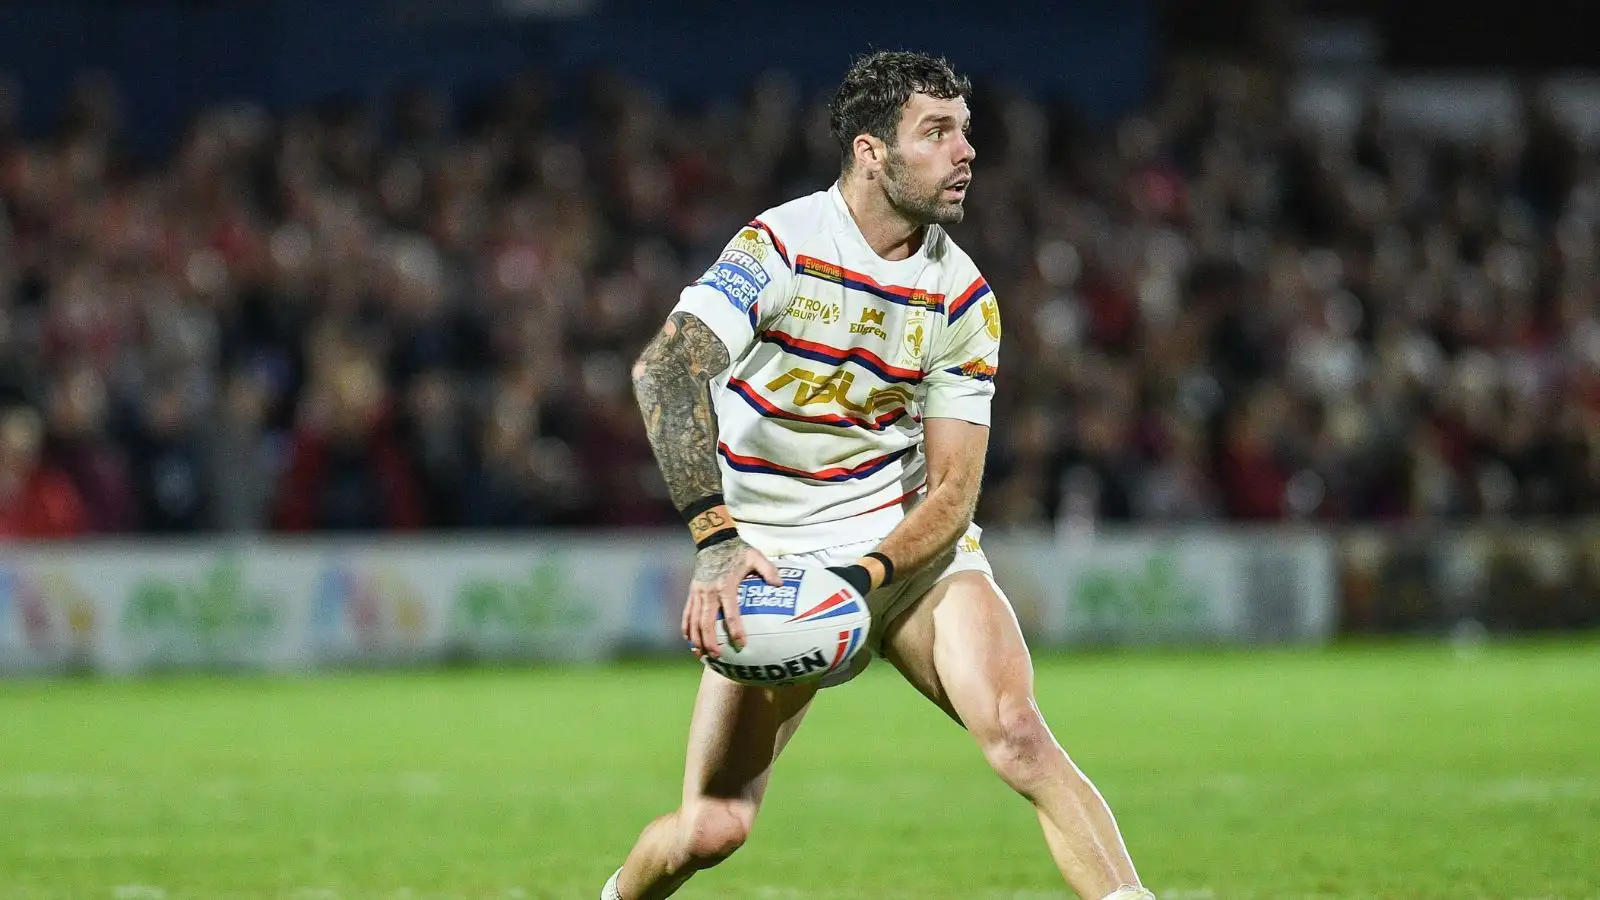 Will Dagger in action for Wakefield Trinity